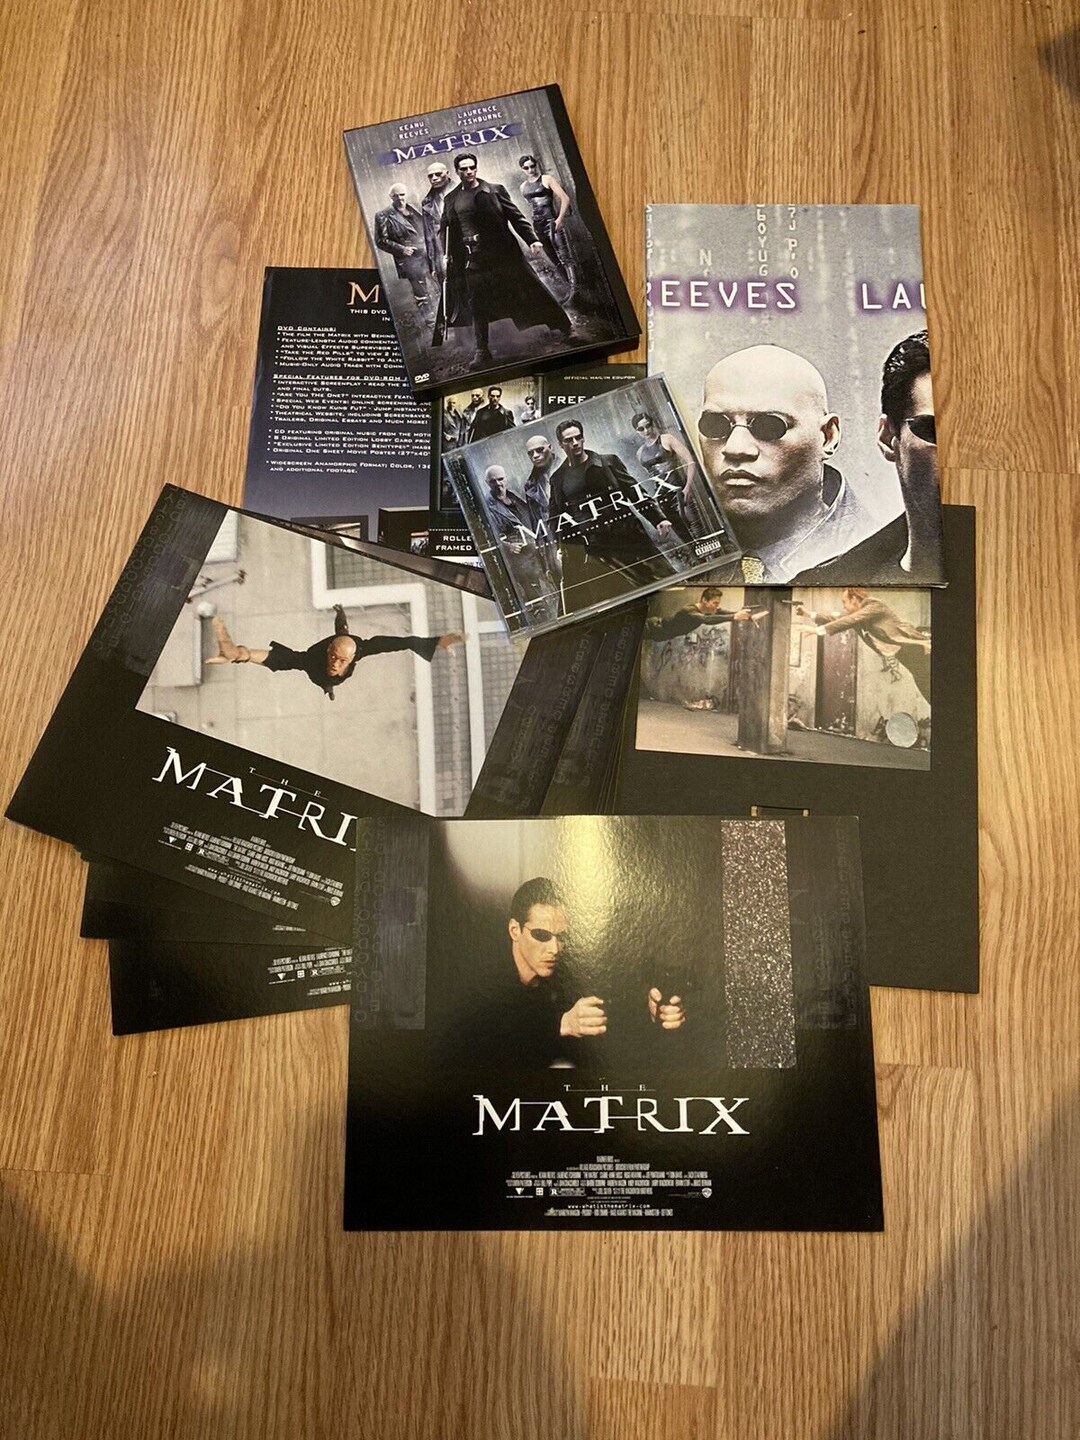 The Matrix Cda Deluxe Special Edition Dvd Limited Edition Collectors Set Framed Poster 